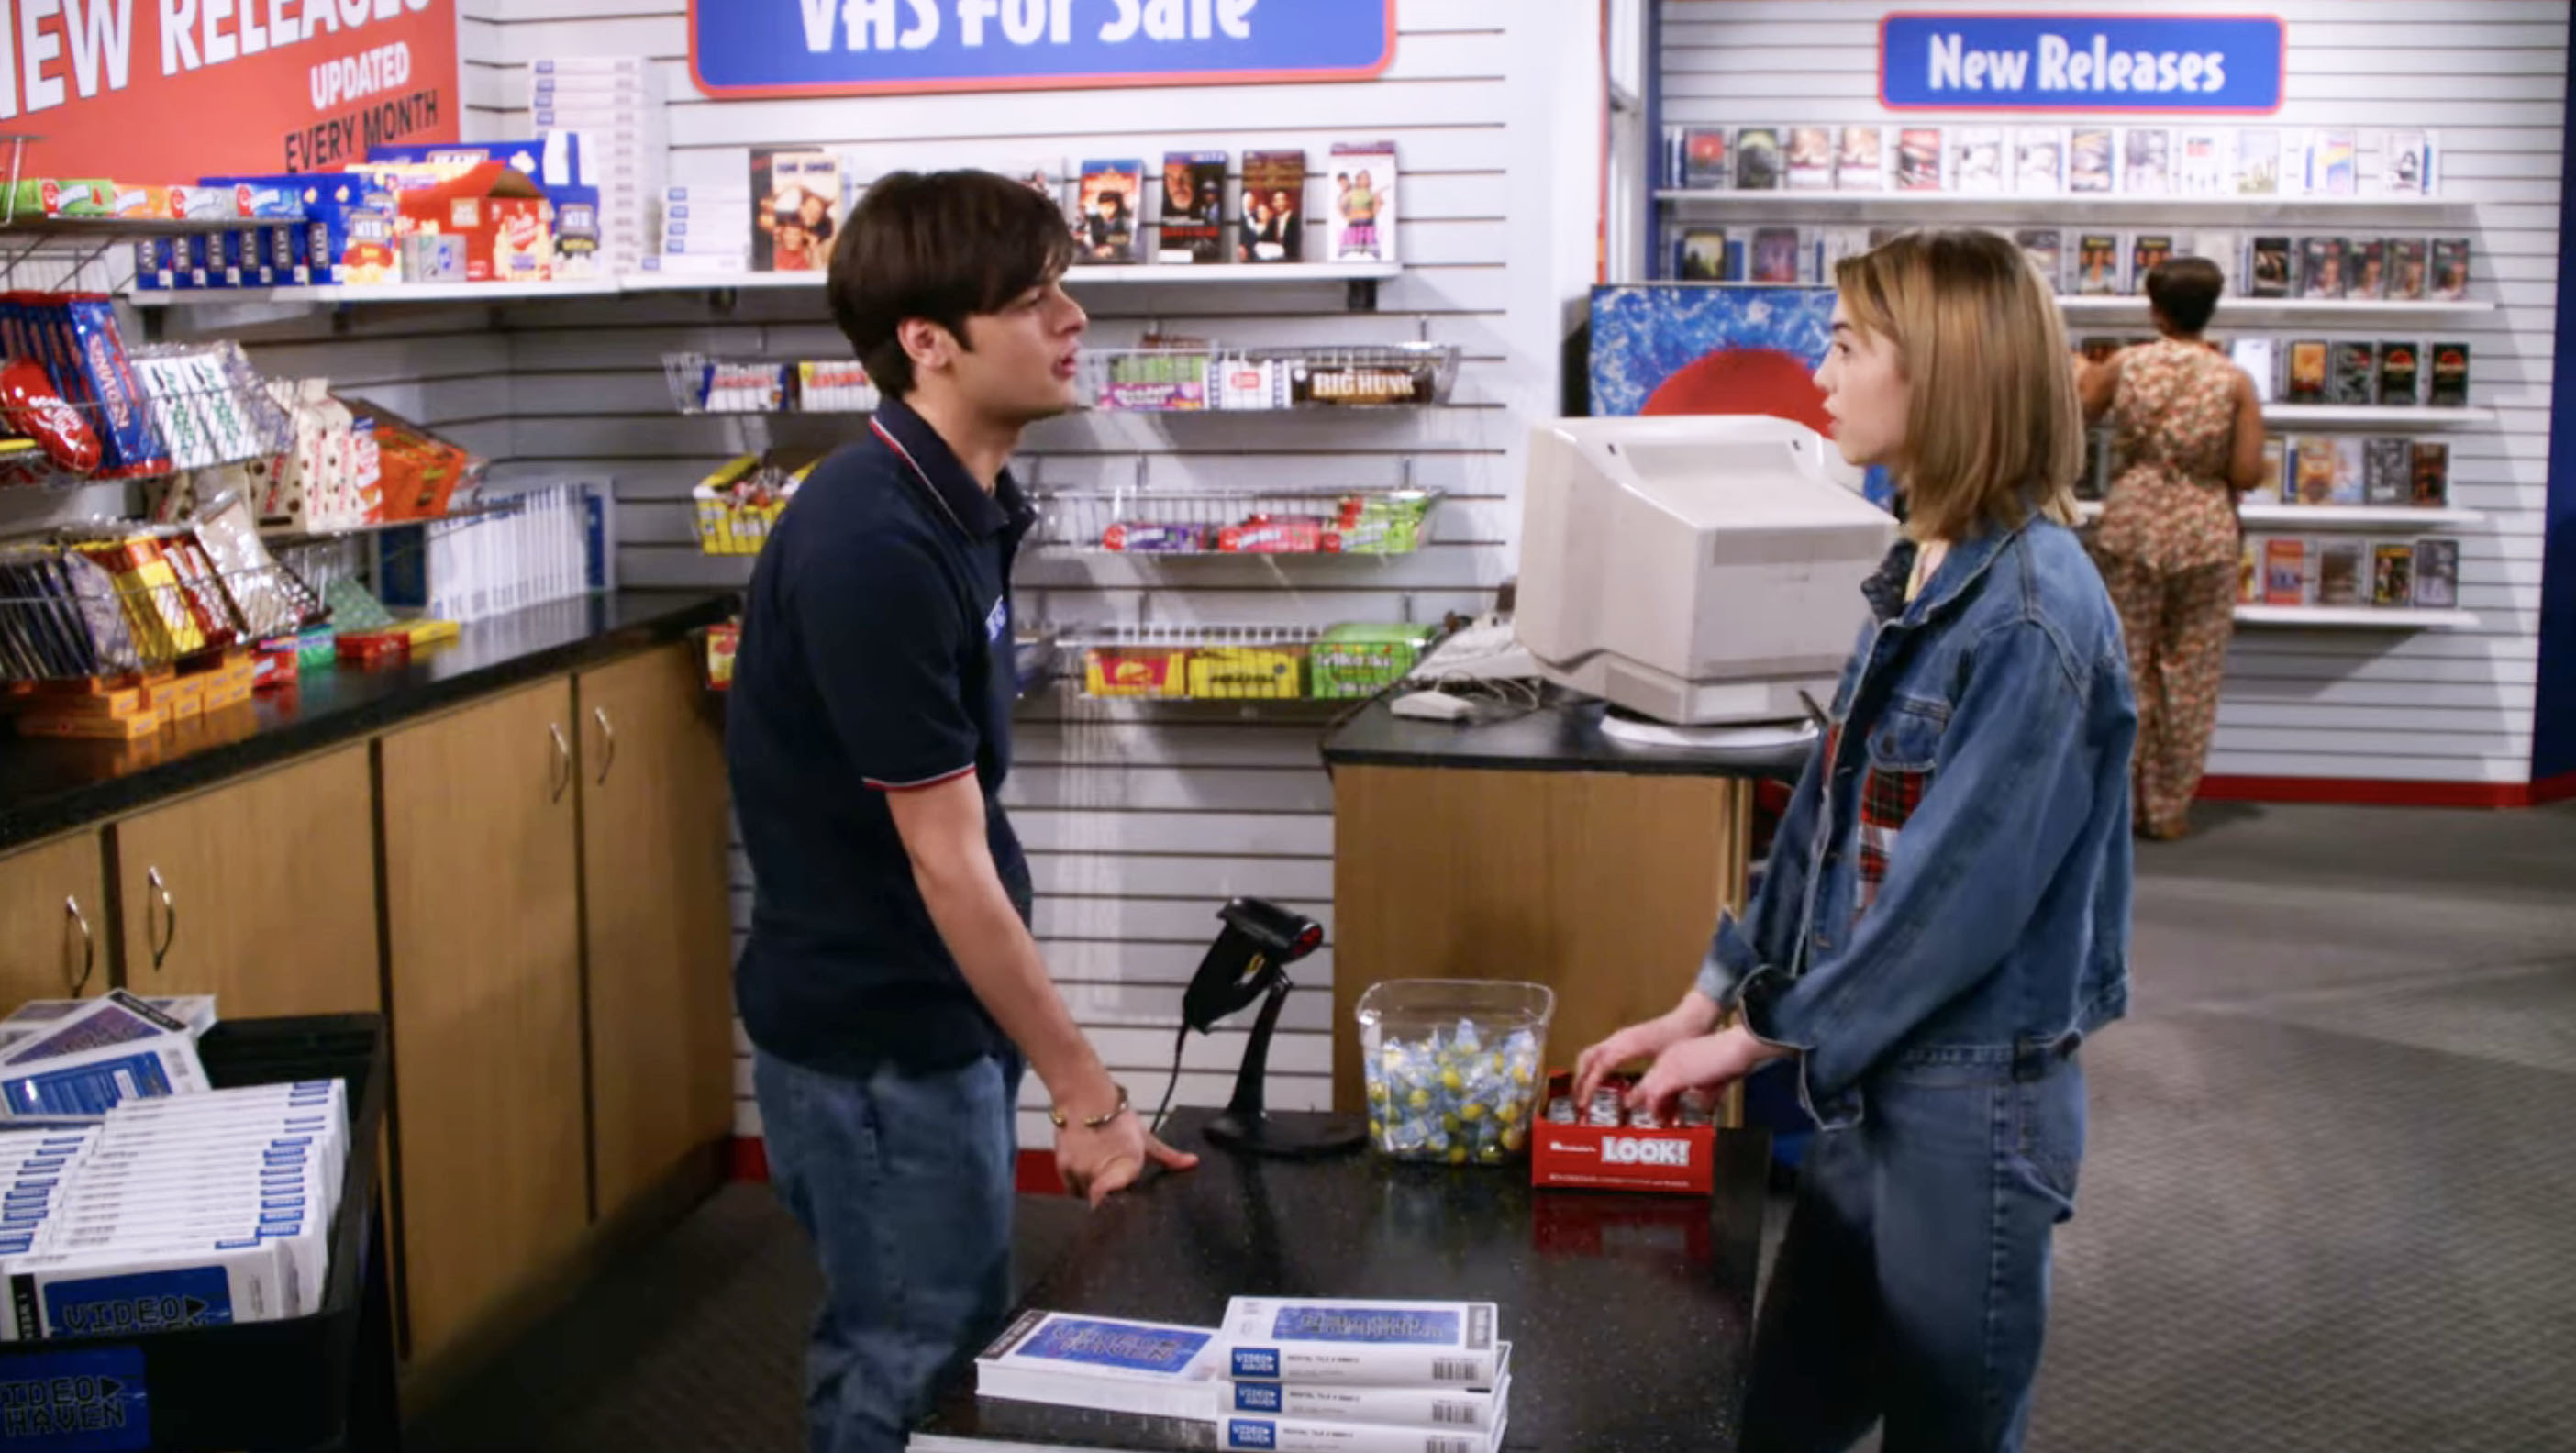 Jay and Leia in a video store